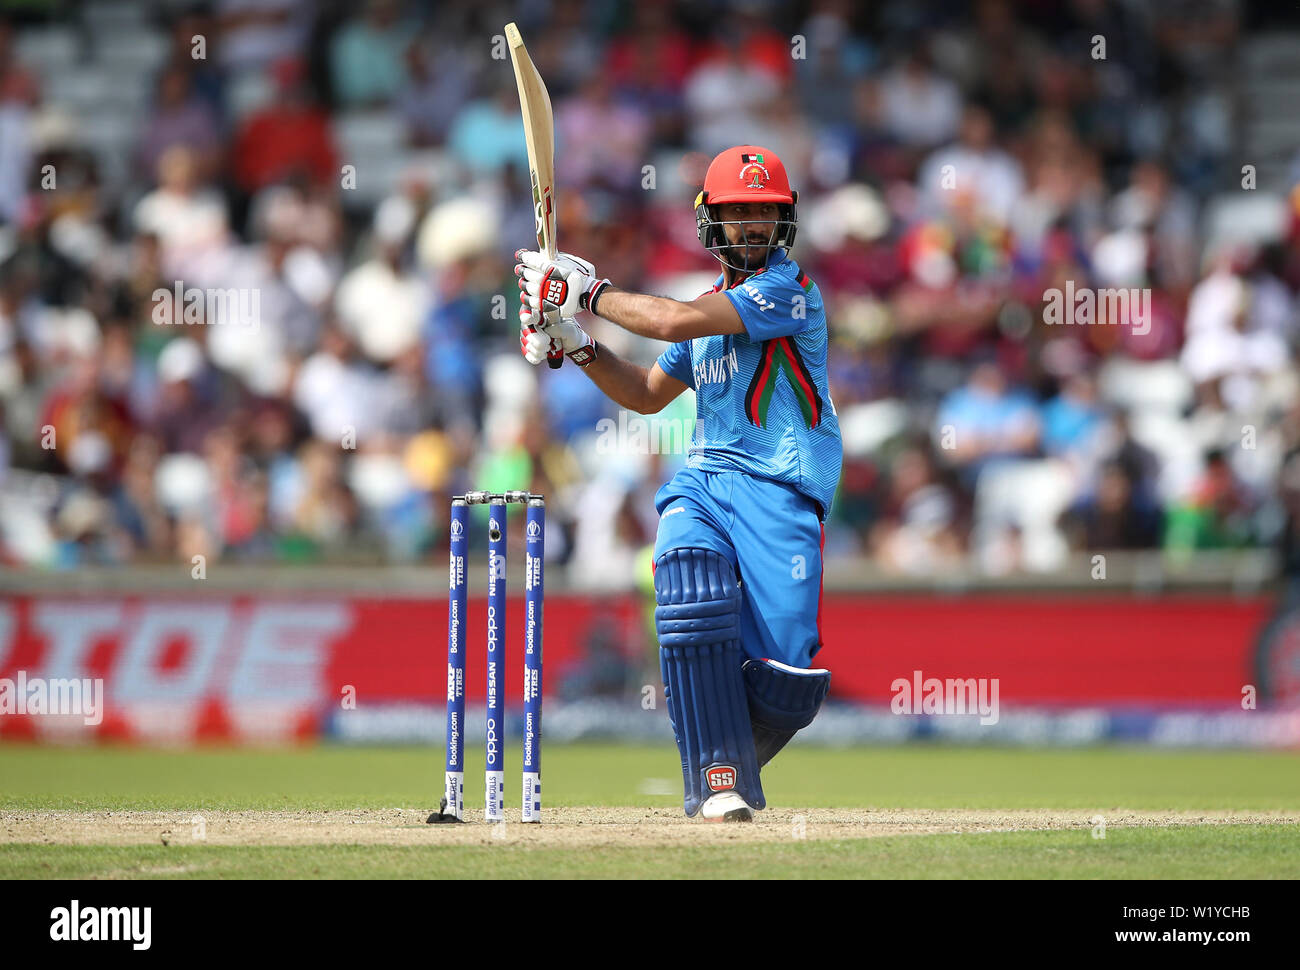 Afghanistan's Ikram Alikhil in action during the ICC Cricket World Cup group stage match at Headingley, Leeds. Stock Photo